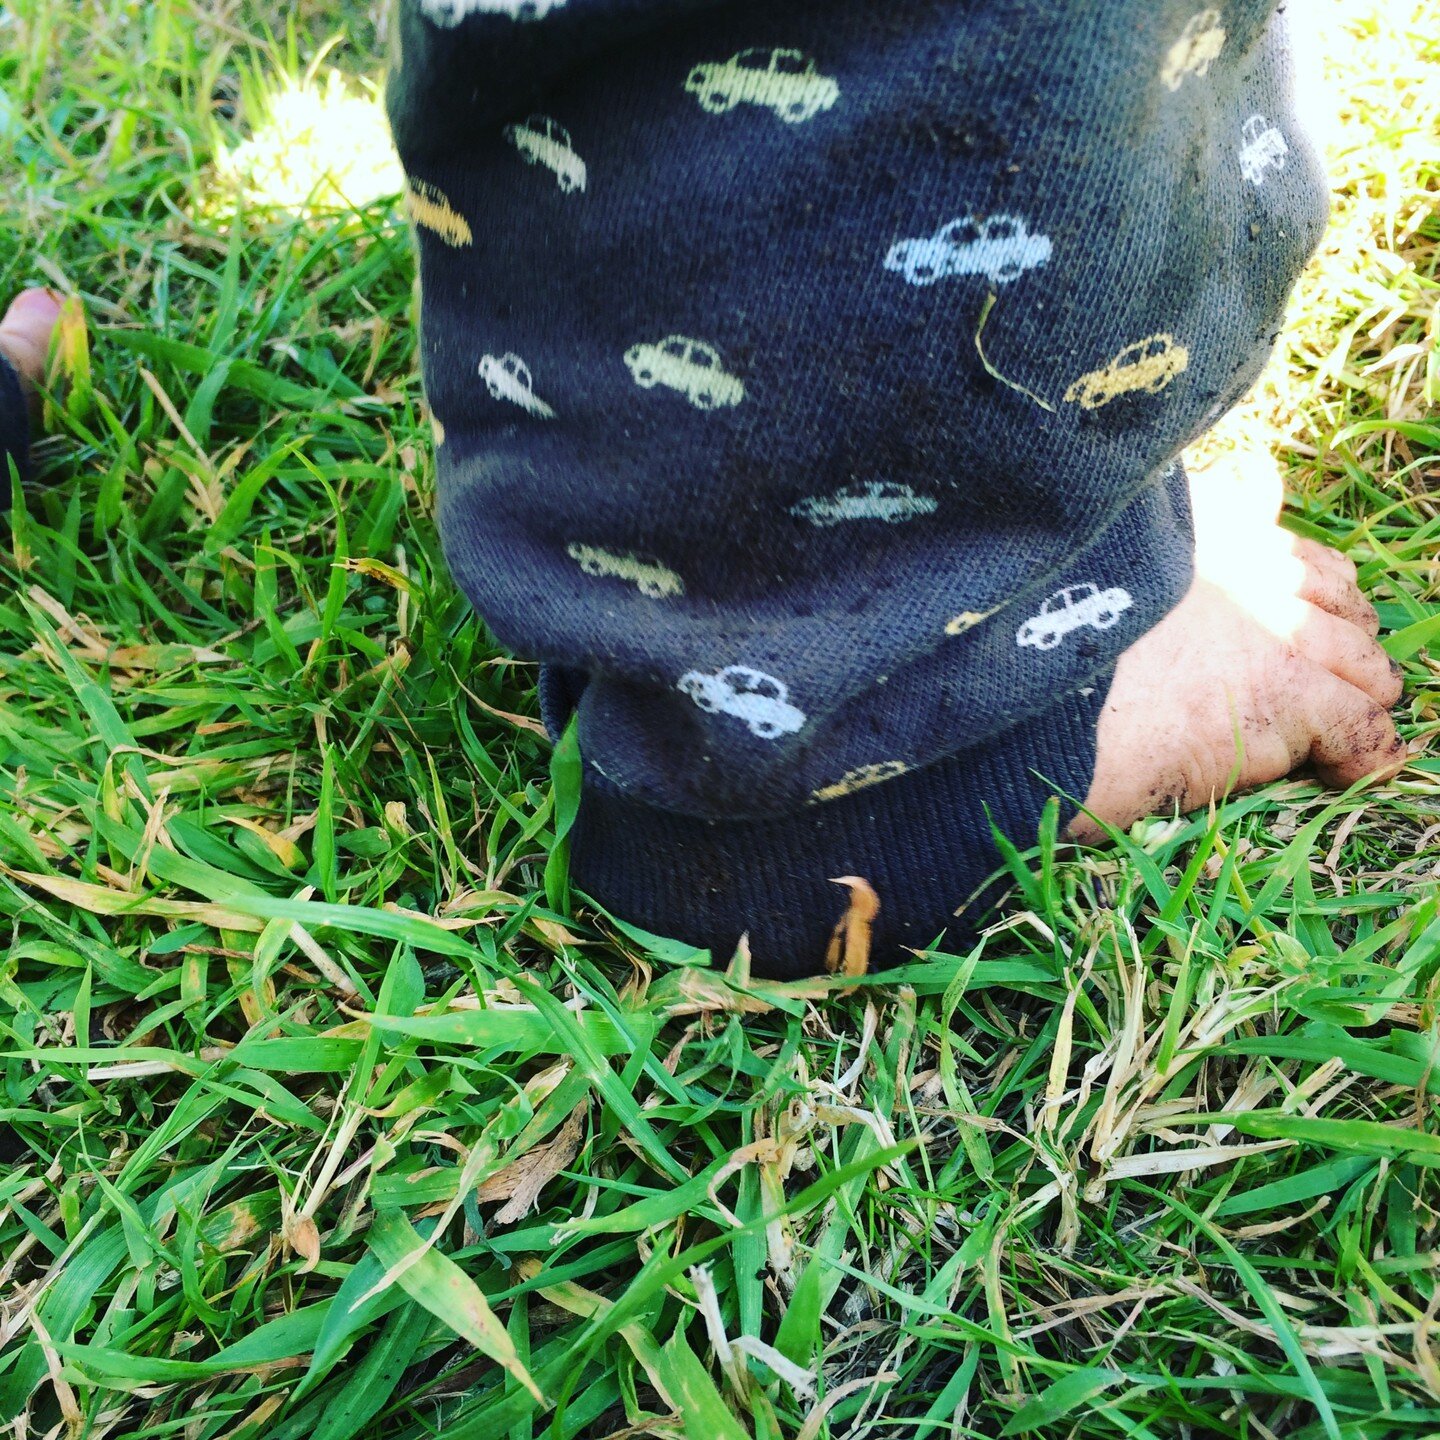 I read a lovely quote the other week, by @WilderChild that read: 'The dirtier the feet, the happier the heart.' and this is certainly true for my son, pictured here! For me, just being in Nature makes my heart happy, dirty feet or not!

A simple rest